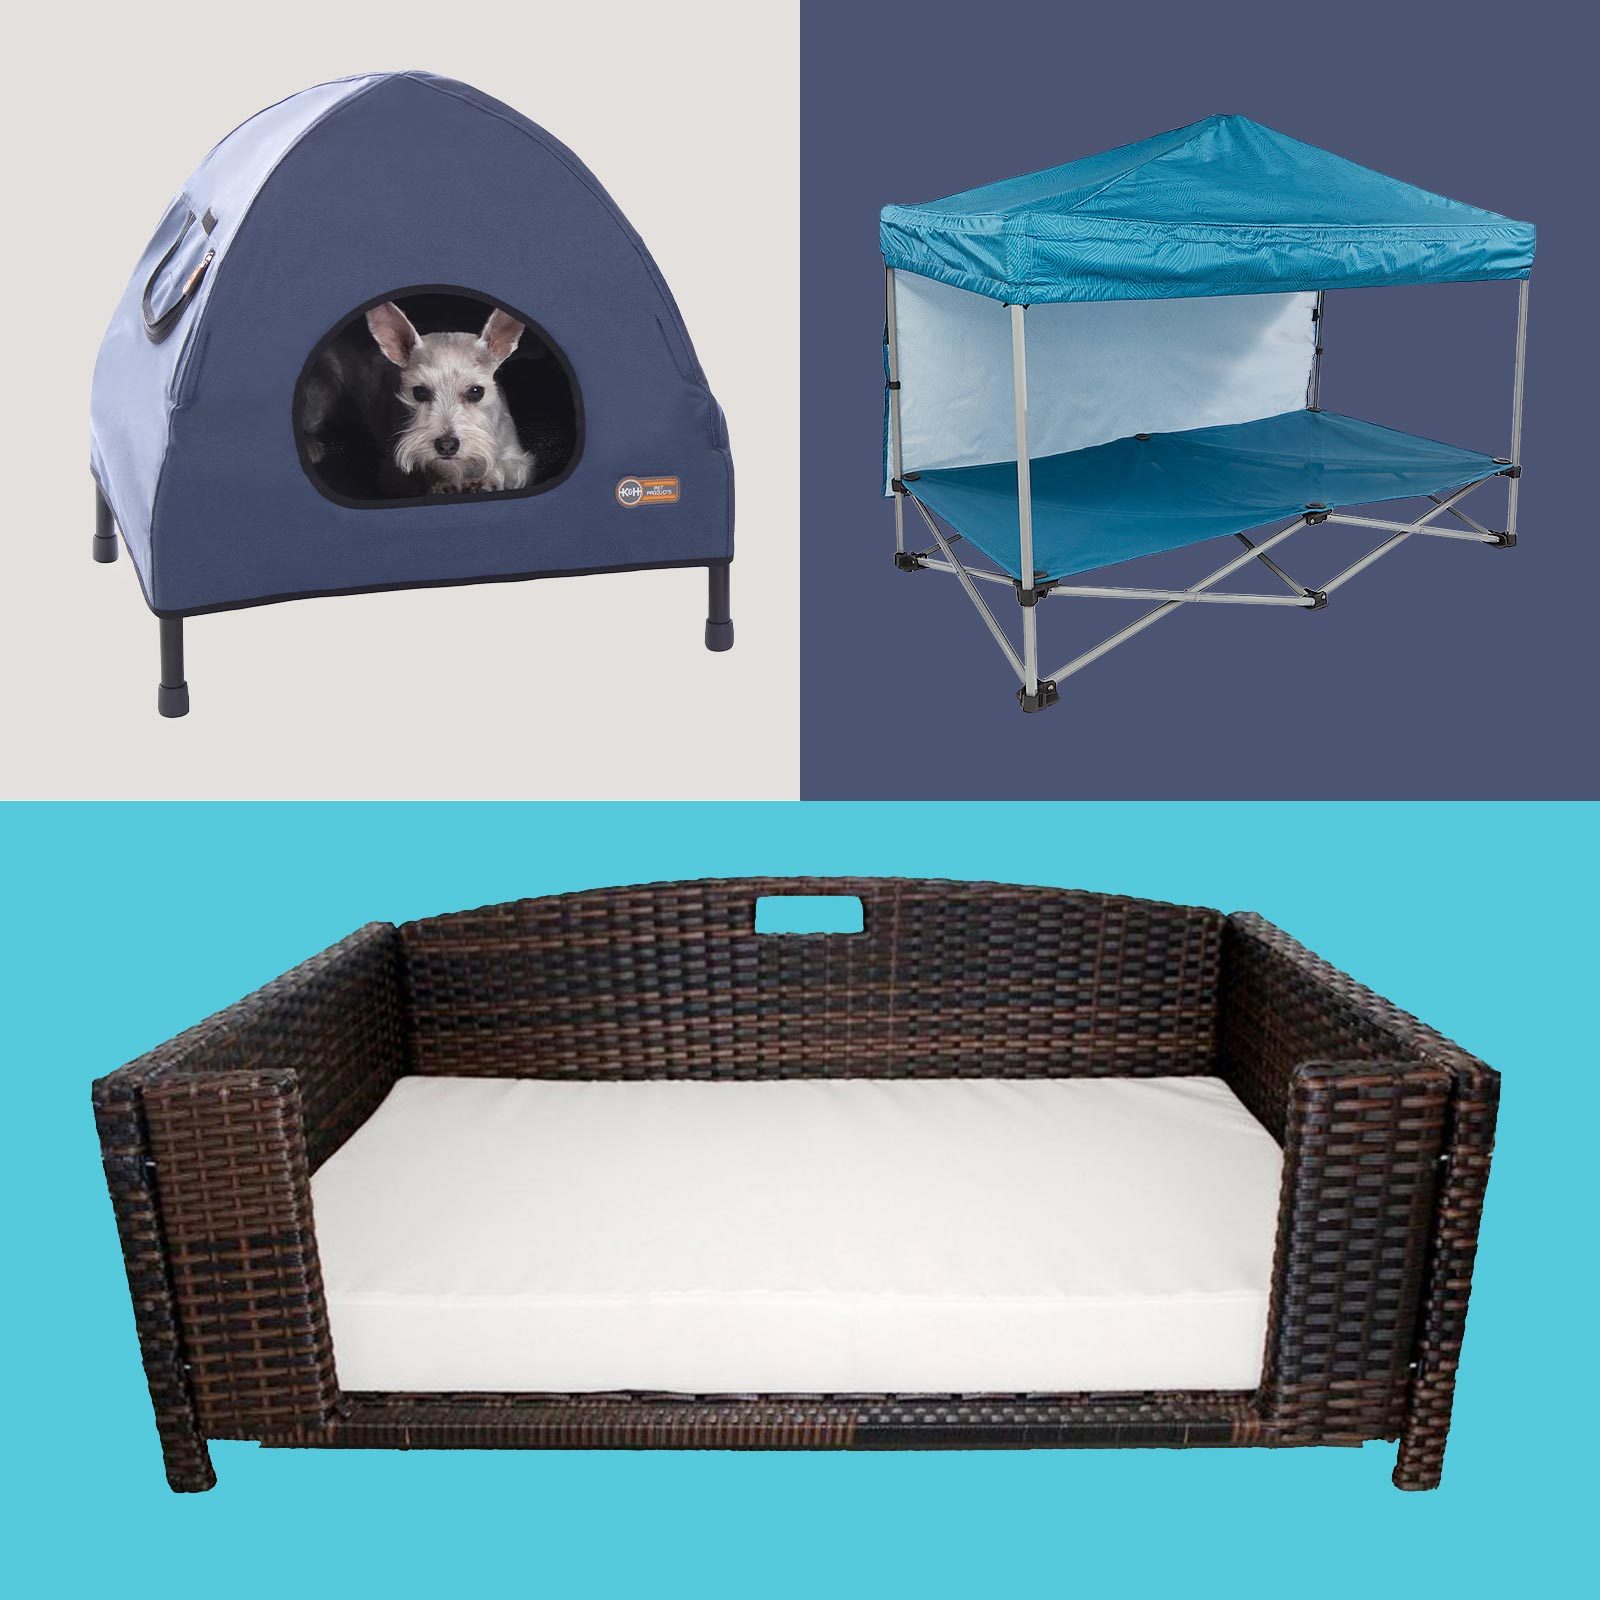 https://www.rd.com/wp-content/uploads/2023/06/RD-ecomm-7-Best-Elevated-Dog-Beds-To-Keep-Your-Pup-Cool-While-Lounging-Outside-via-merchant-3.jpg?fit=700%2C700